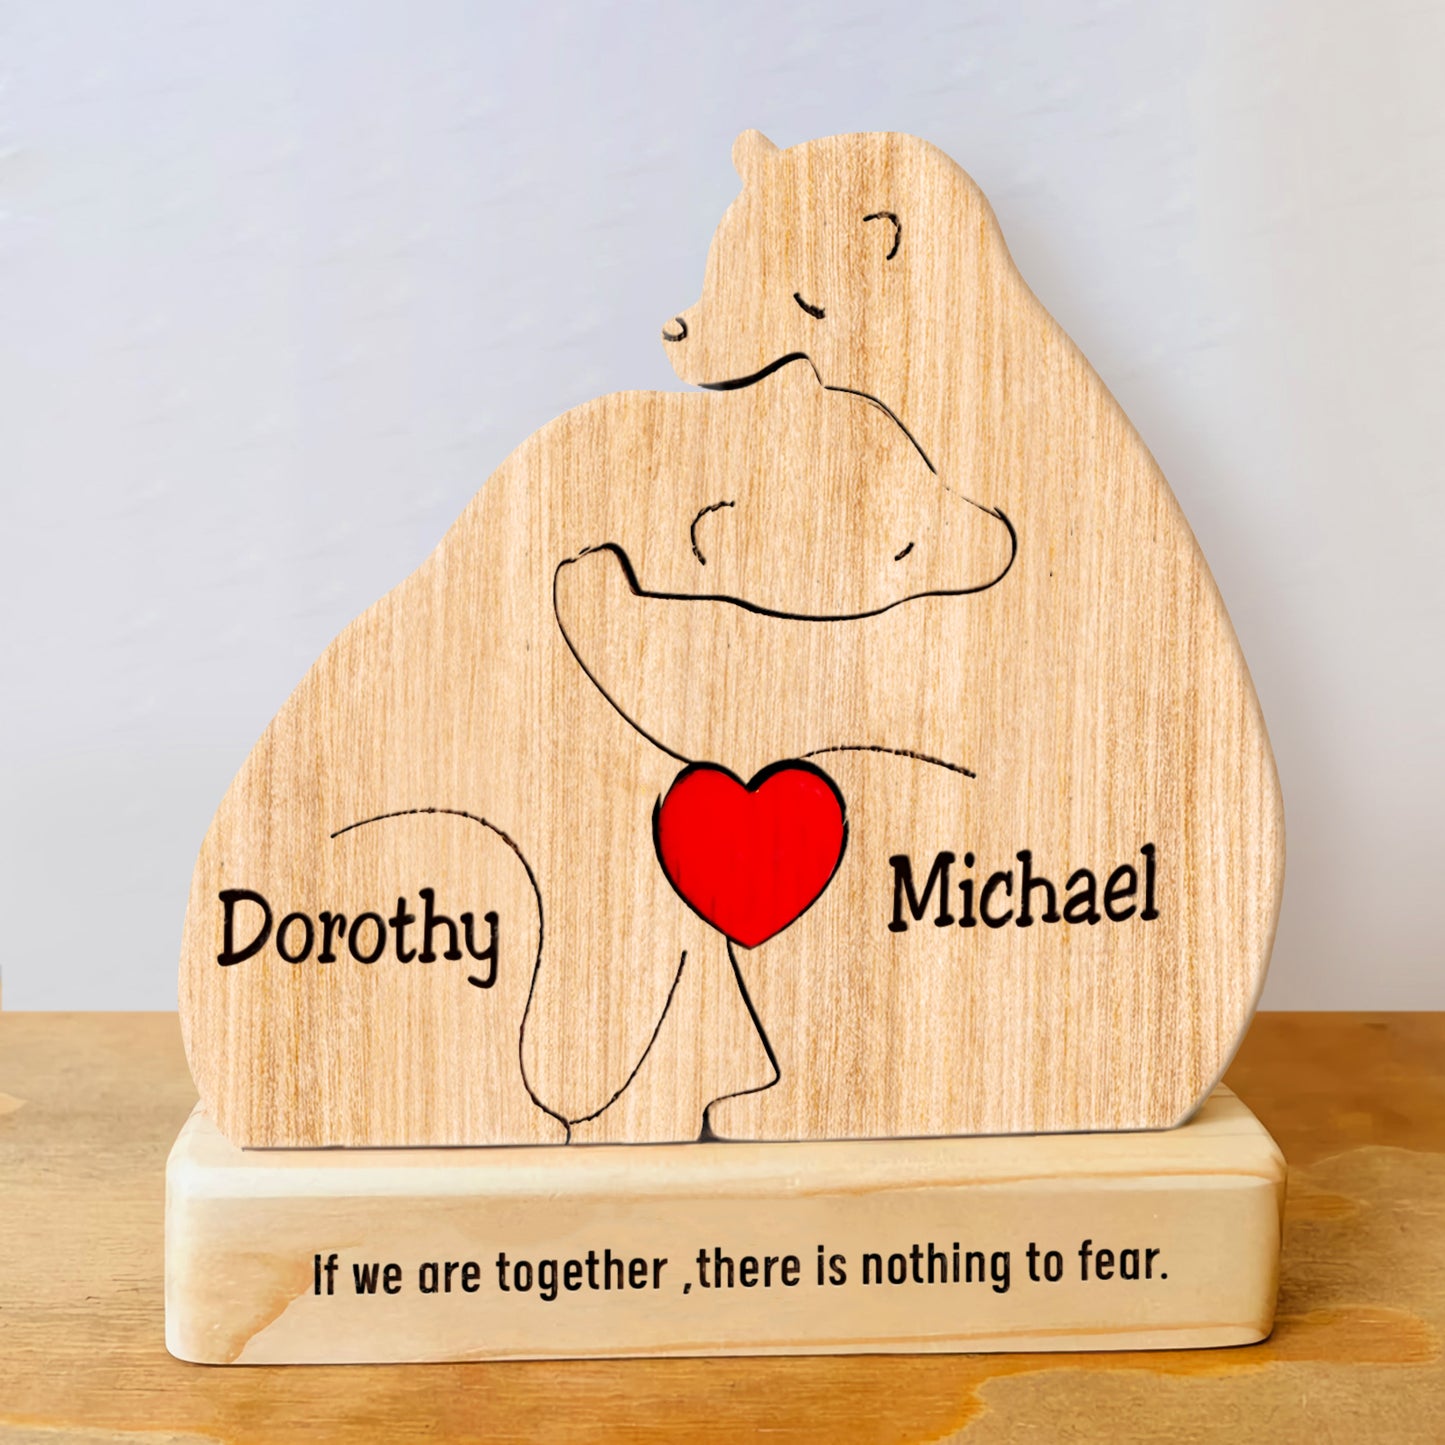 Family - Bear Family - Personalized Wooden Puzzle